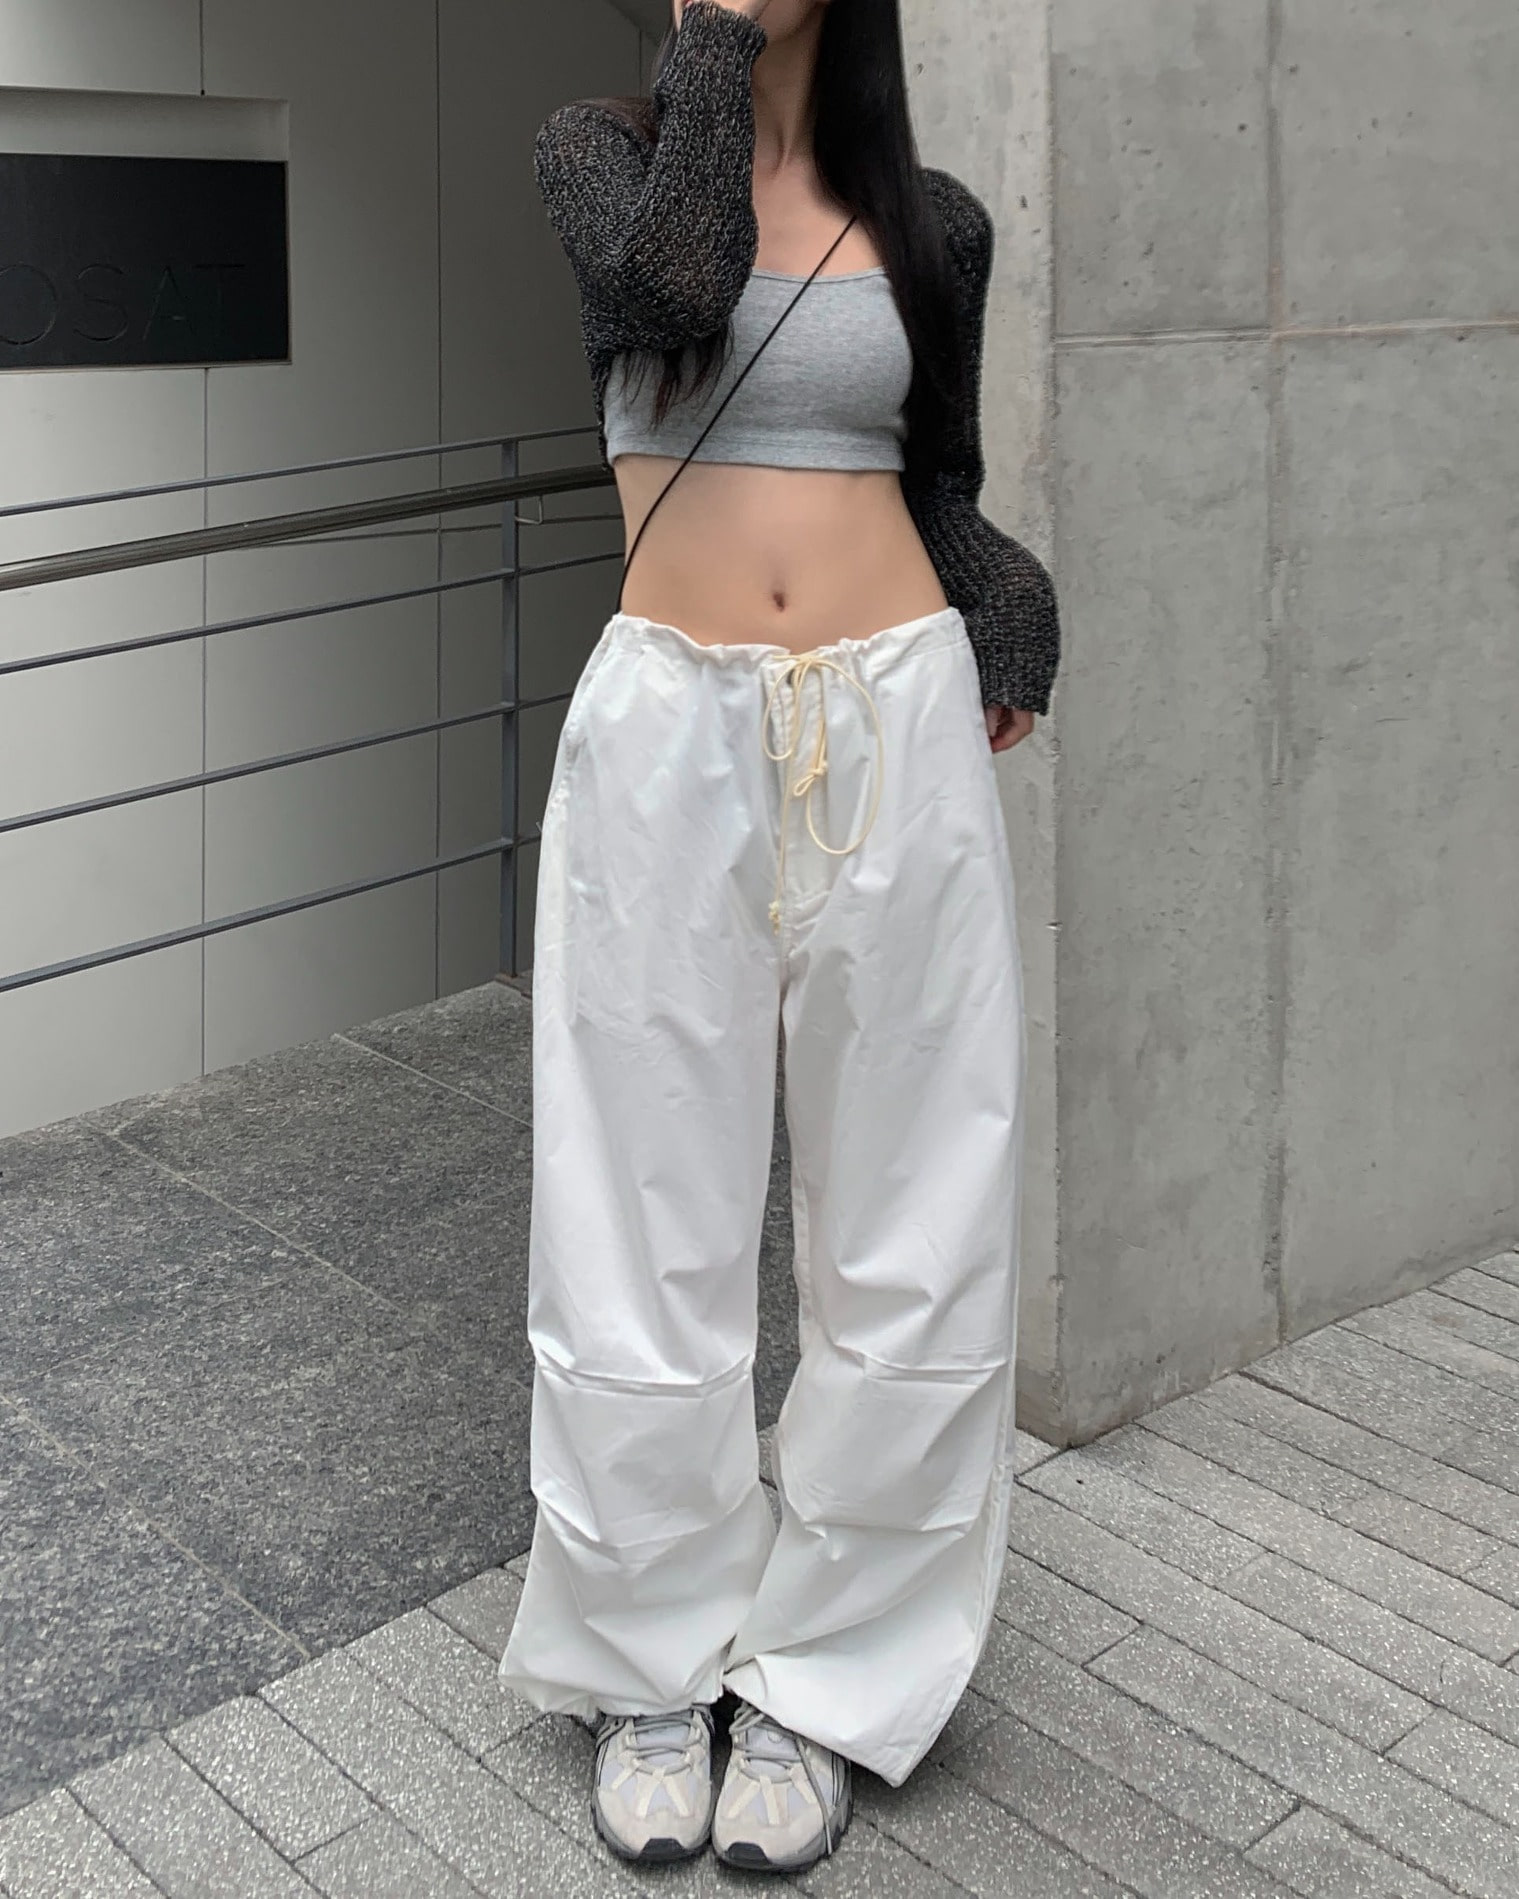 Over string pants